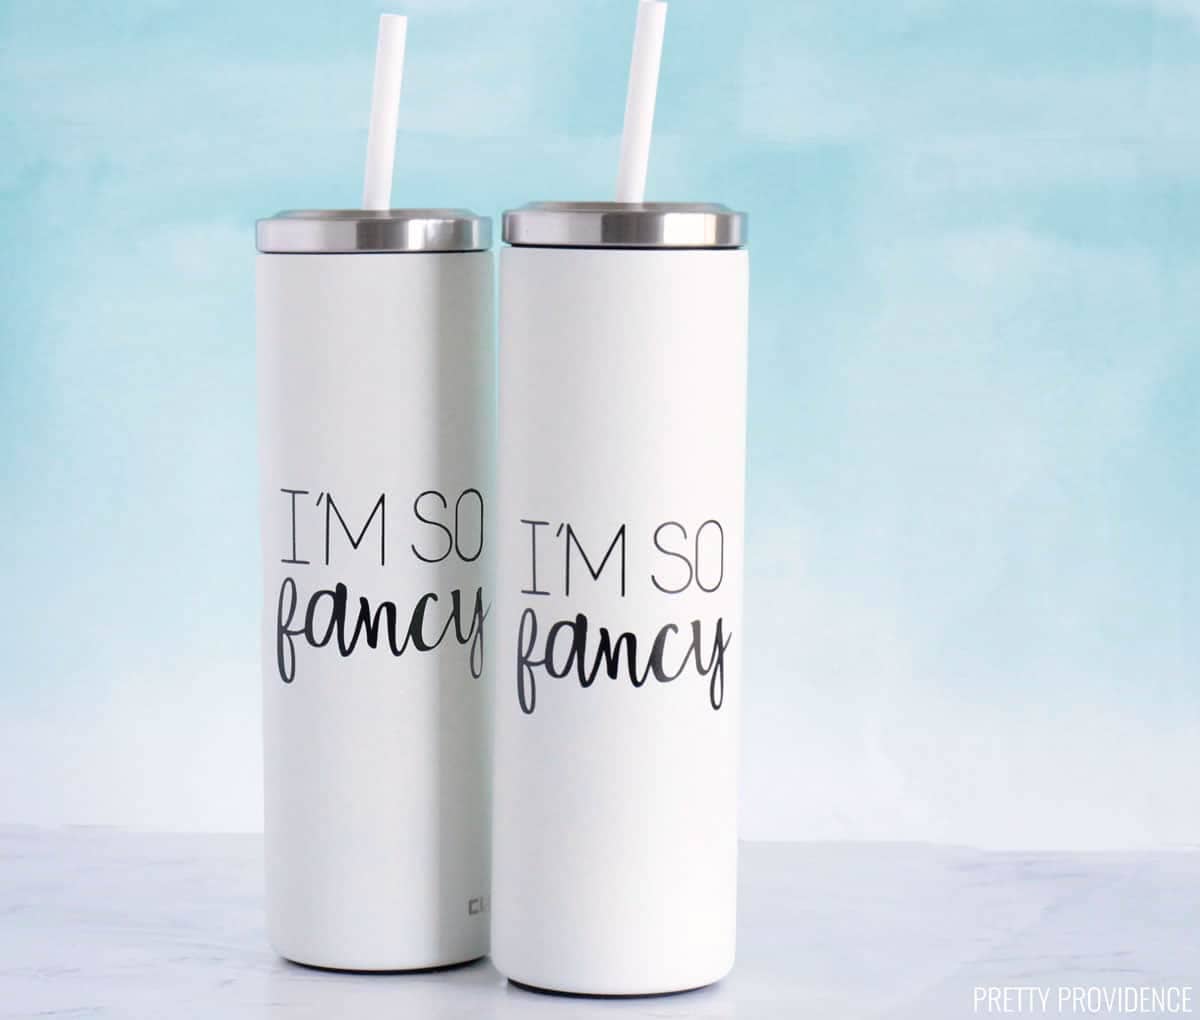 White tumblers with straws and custom decals made with Cricut